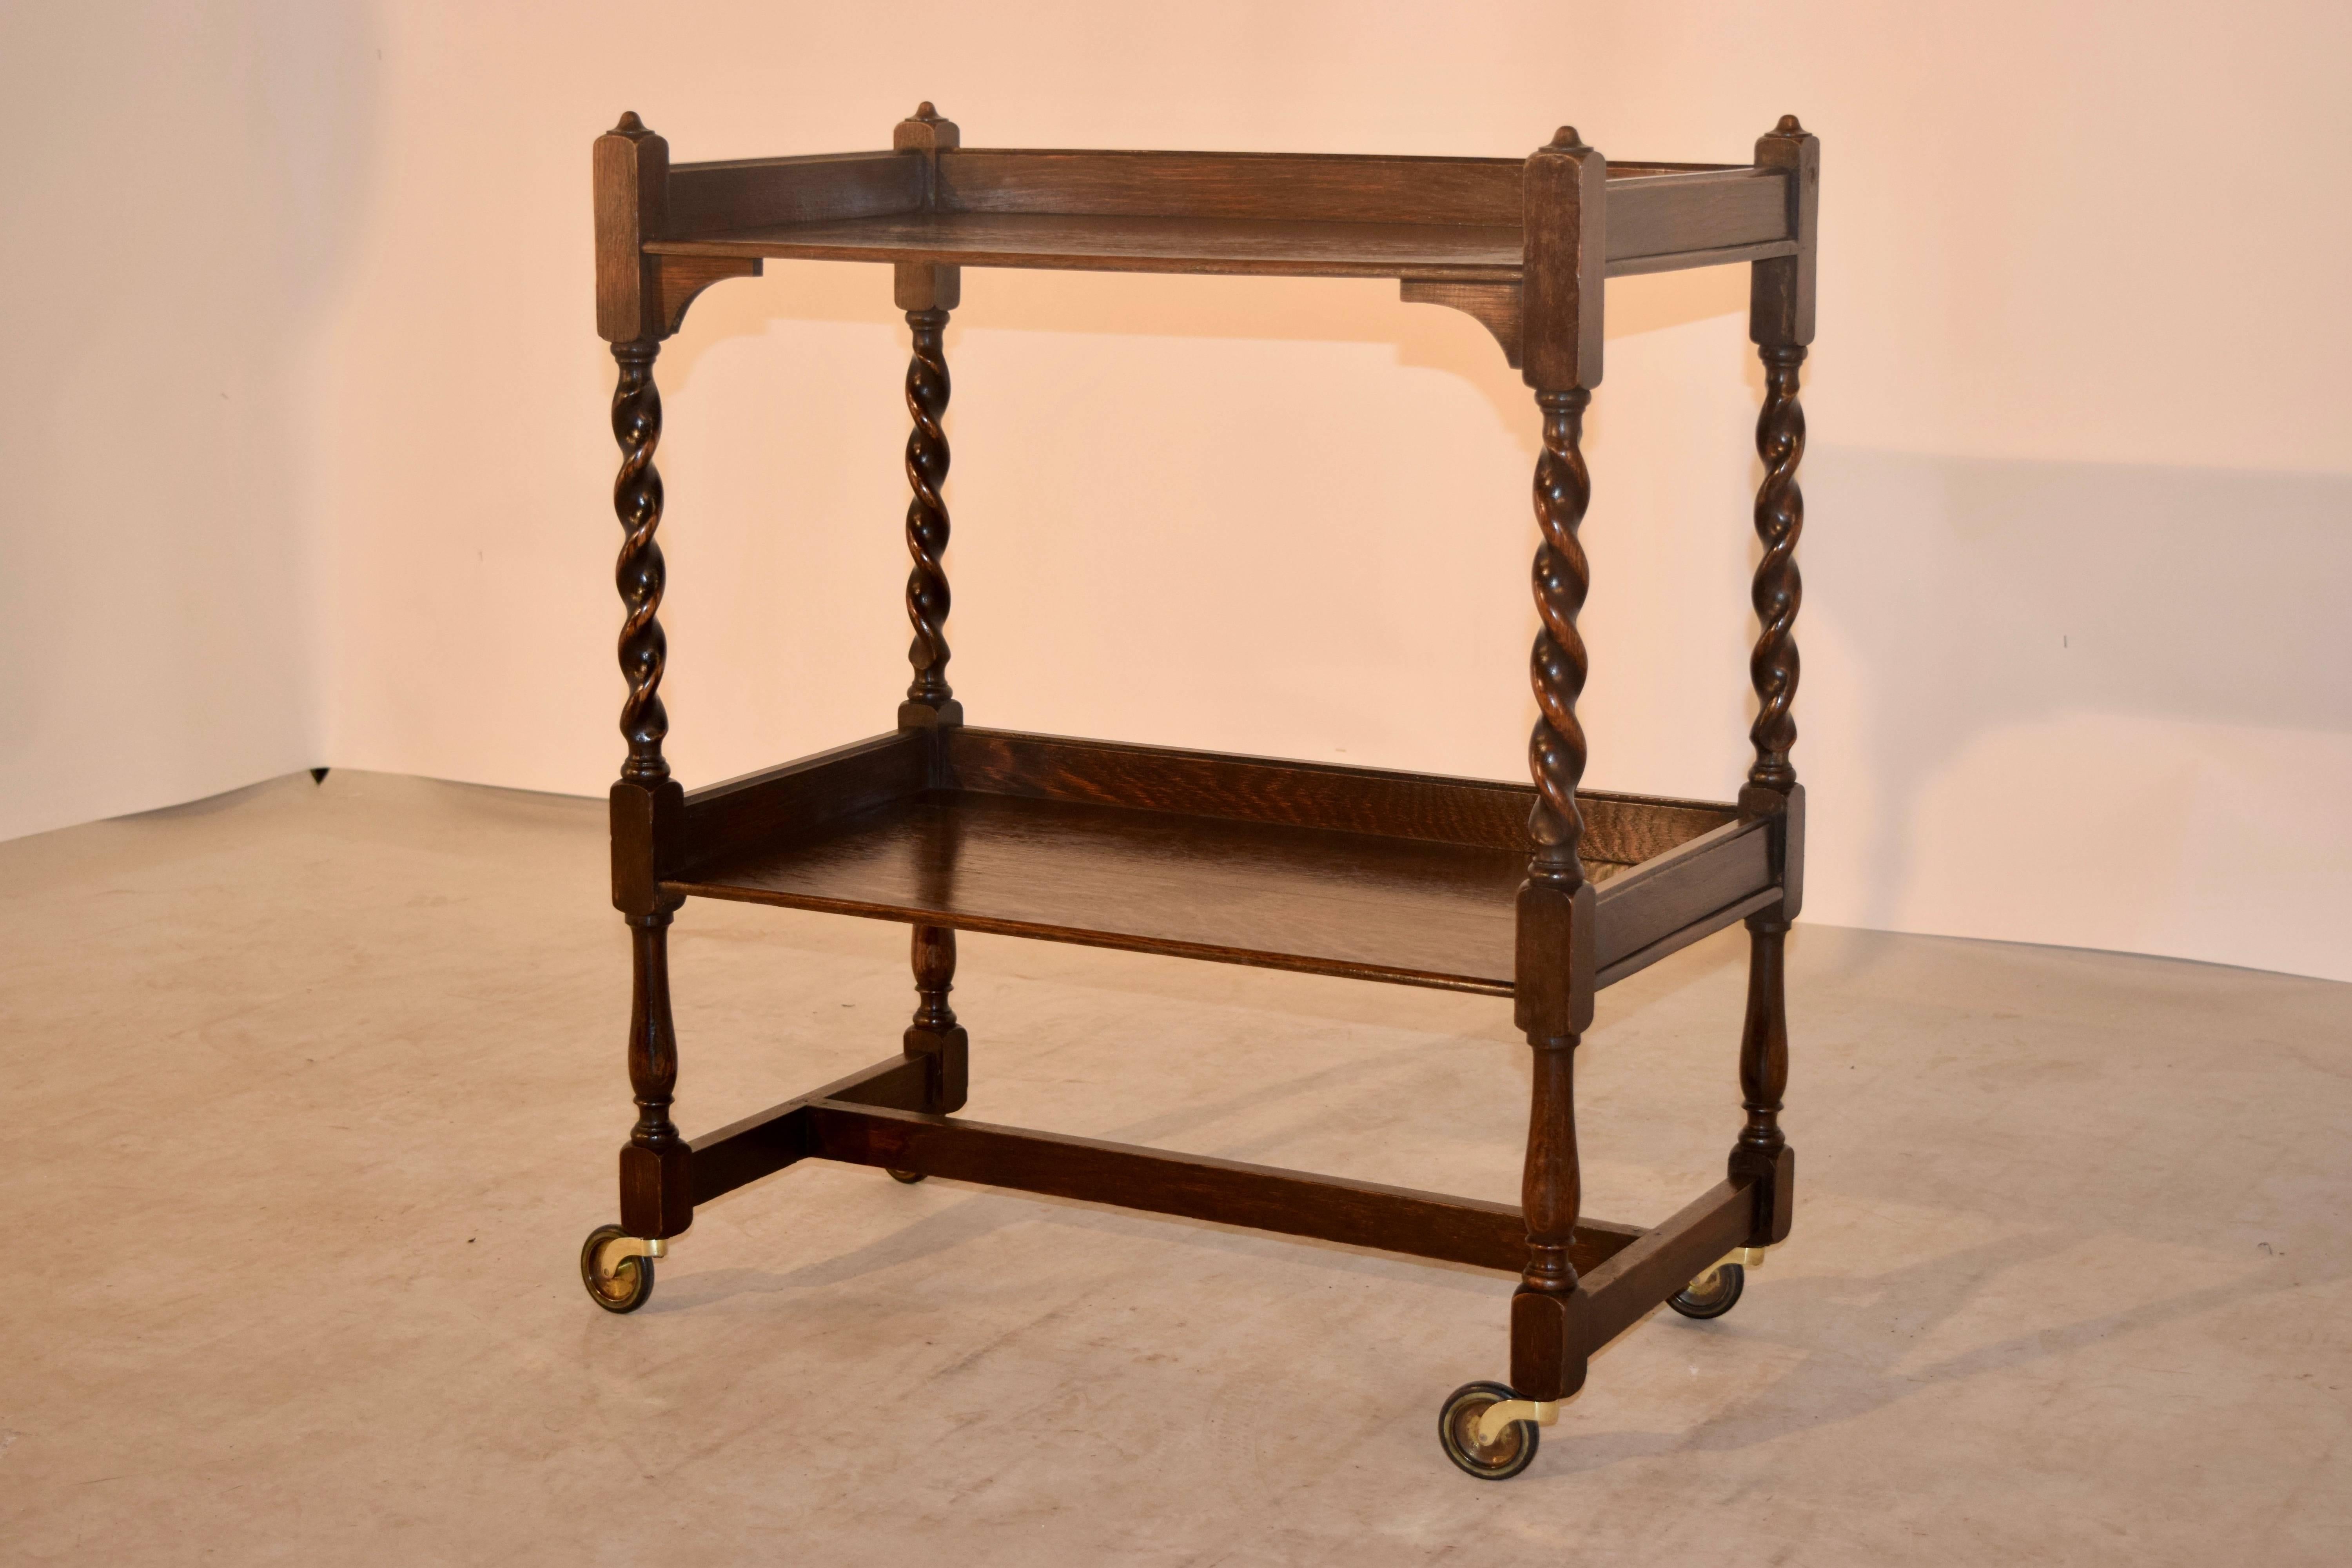 English oak drink cart, circa 1900. This piece has two shelves, separated by hand turned barley twist shelf supports and turned legs at the bottom for contrast, joined by simple stretchers. Raised on casters.